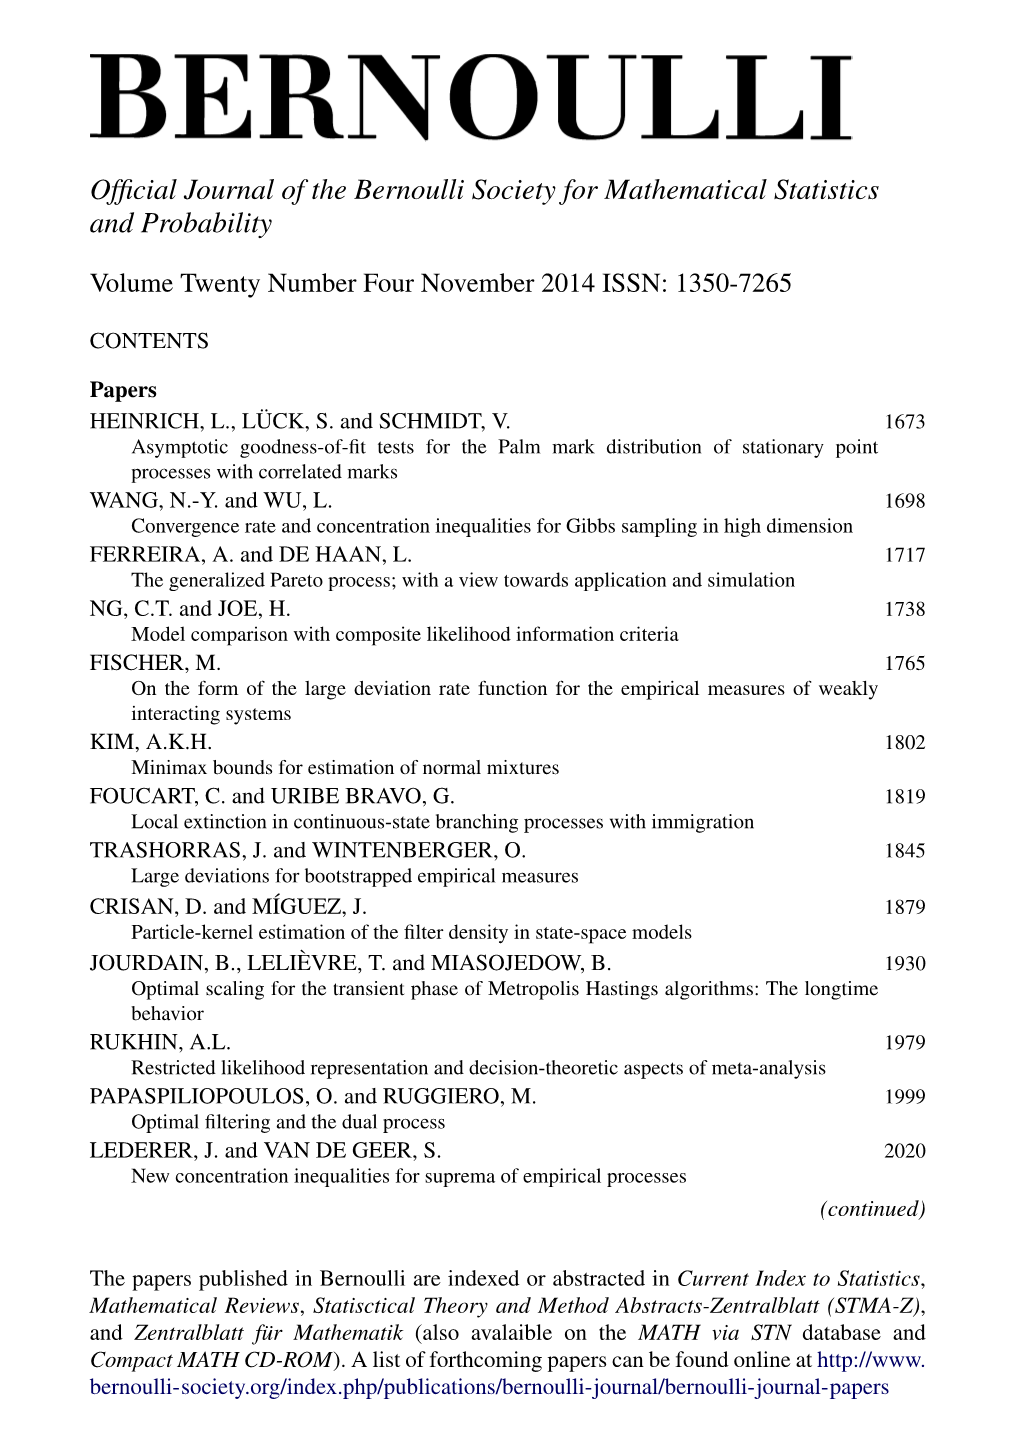 Official Journal of the Bernoulli Society for Mathematical Statistics And